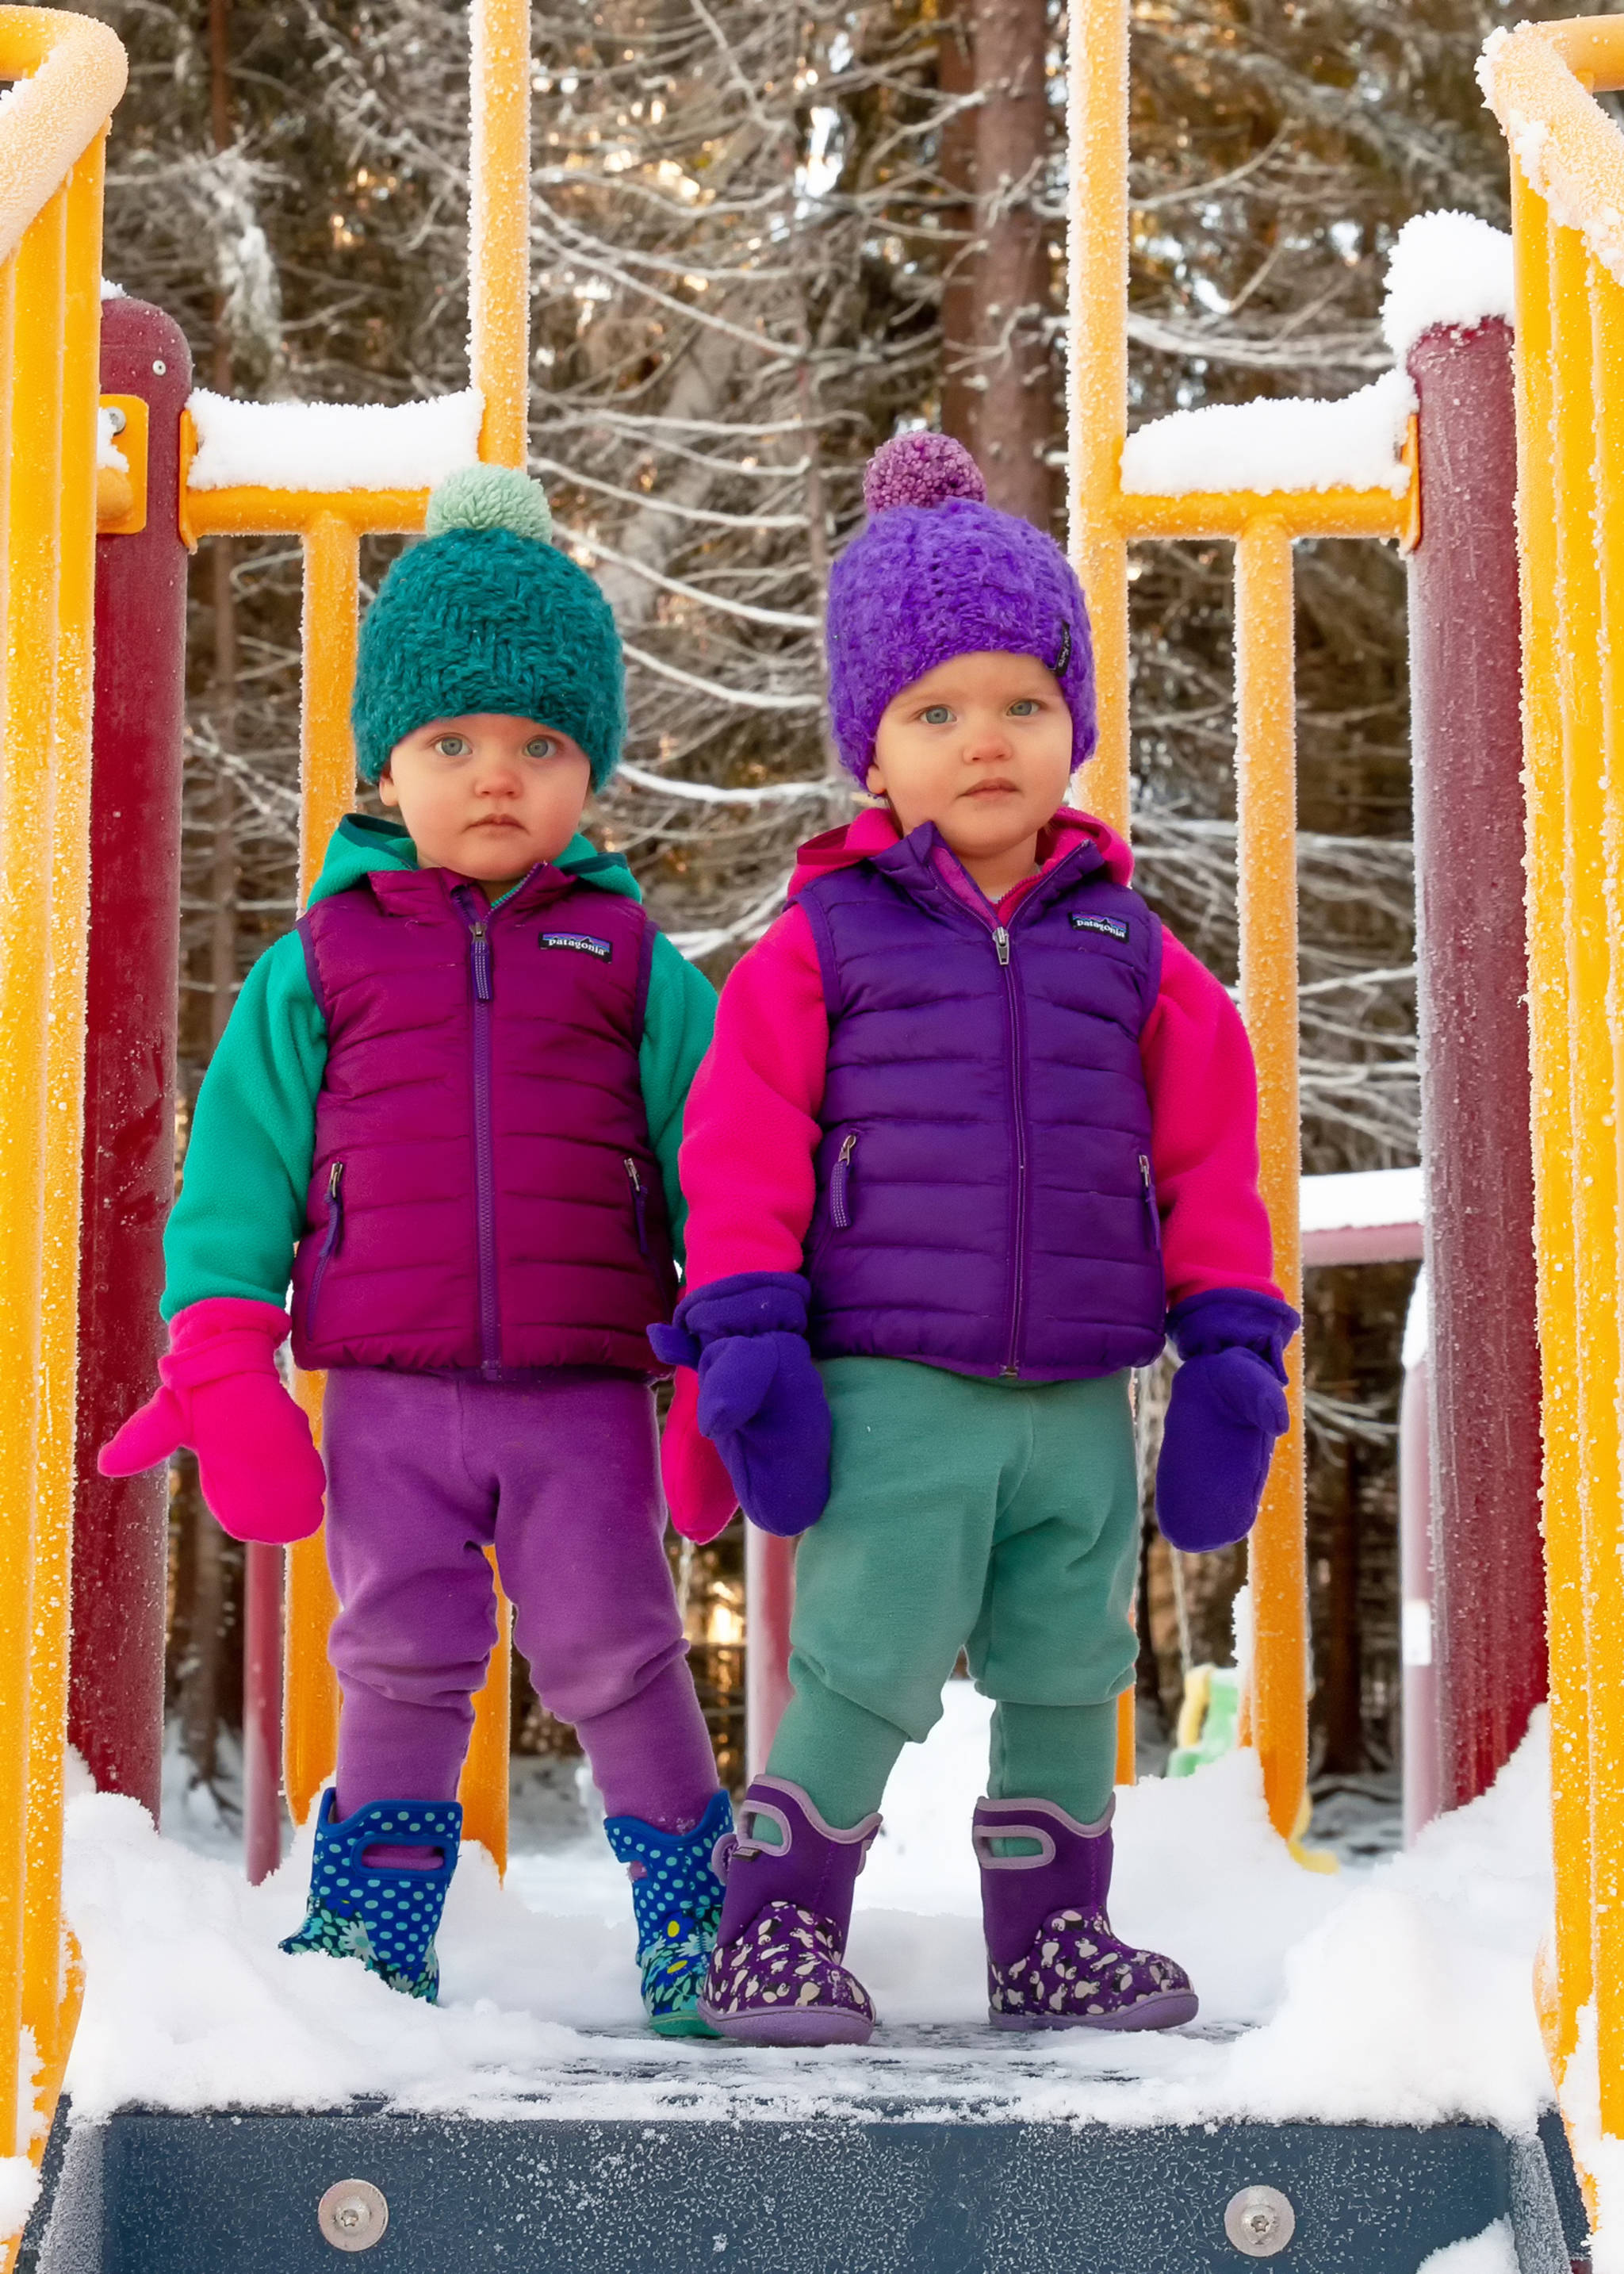 Feb. 24, 2019: Remember the old slogan, “Double your pleasure, double your fun?” Well it doesn’t get much cuter or more fun than identical twins Elise and Claire Beason, spotted at Rotary Park in their coordinated and oh so hip outfits! For this outing, the girls sported matching colors in their wool pants from Wild Coconut, fleece jackets and vests from Patagonia, boots from Bogs, and locally knit hats from WWKnits. Warm, wide-eyed and adorable!